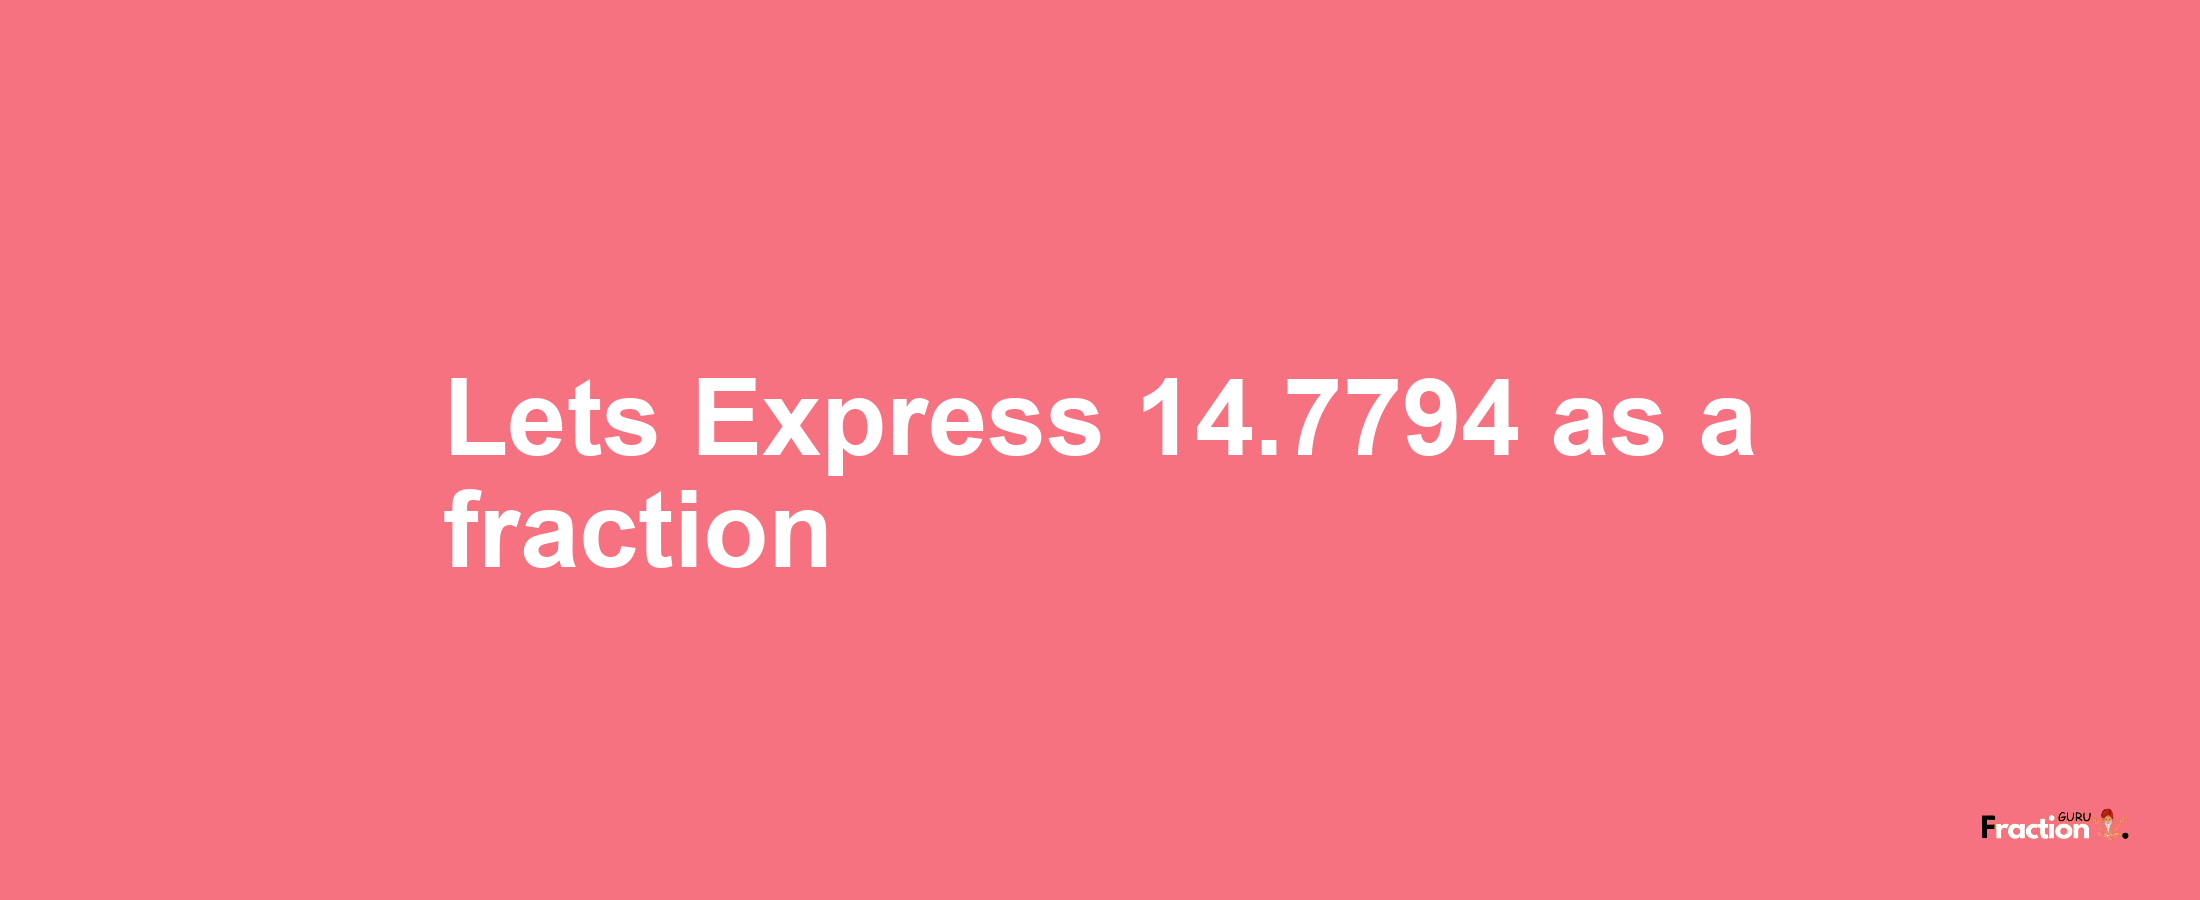 Lets Express 14.7794 as afraction